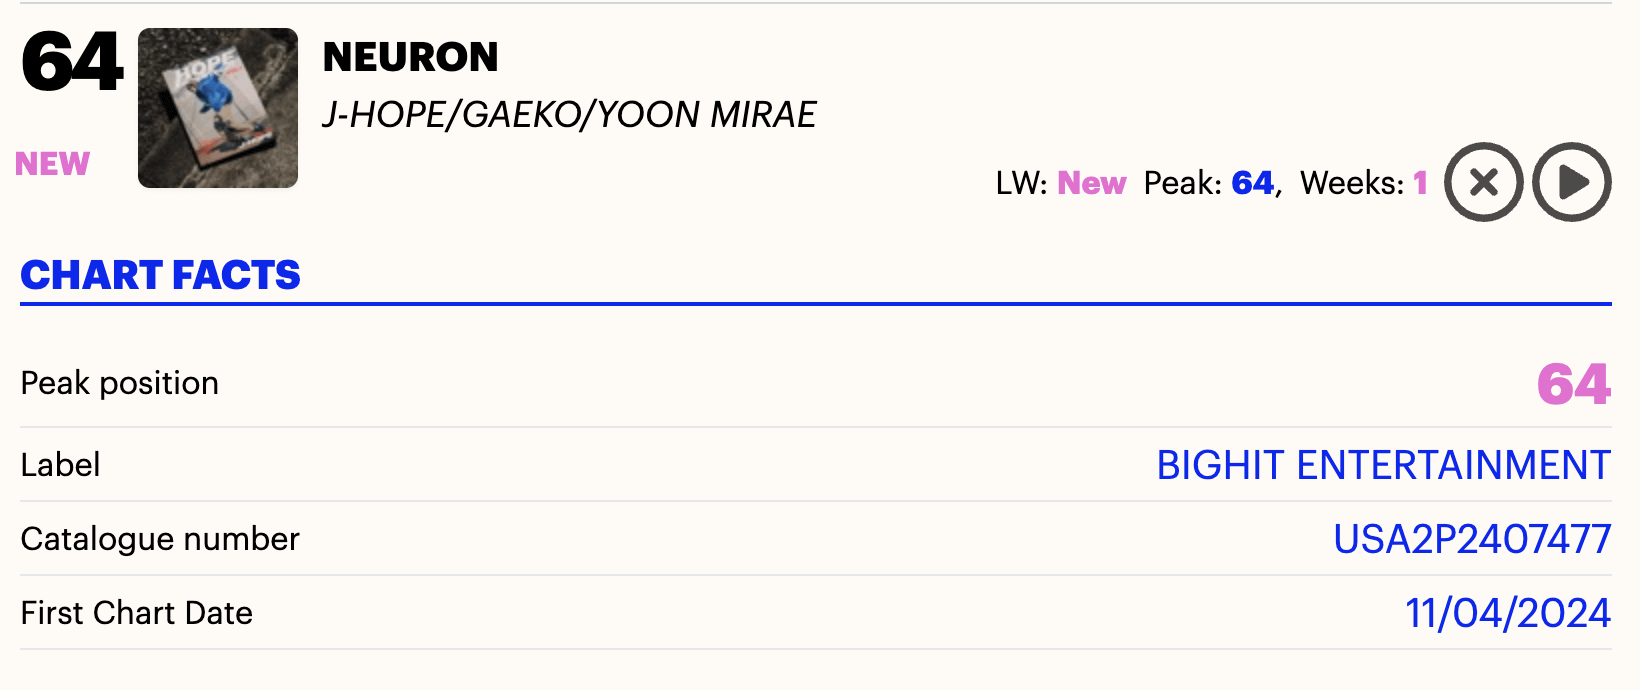 240405 j-hope's "NEURON (with Gaeko, yoonmirae)" debuts at #67 on this week's UK Official Singles Chart